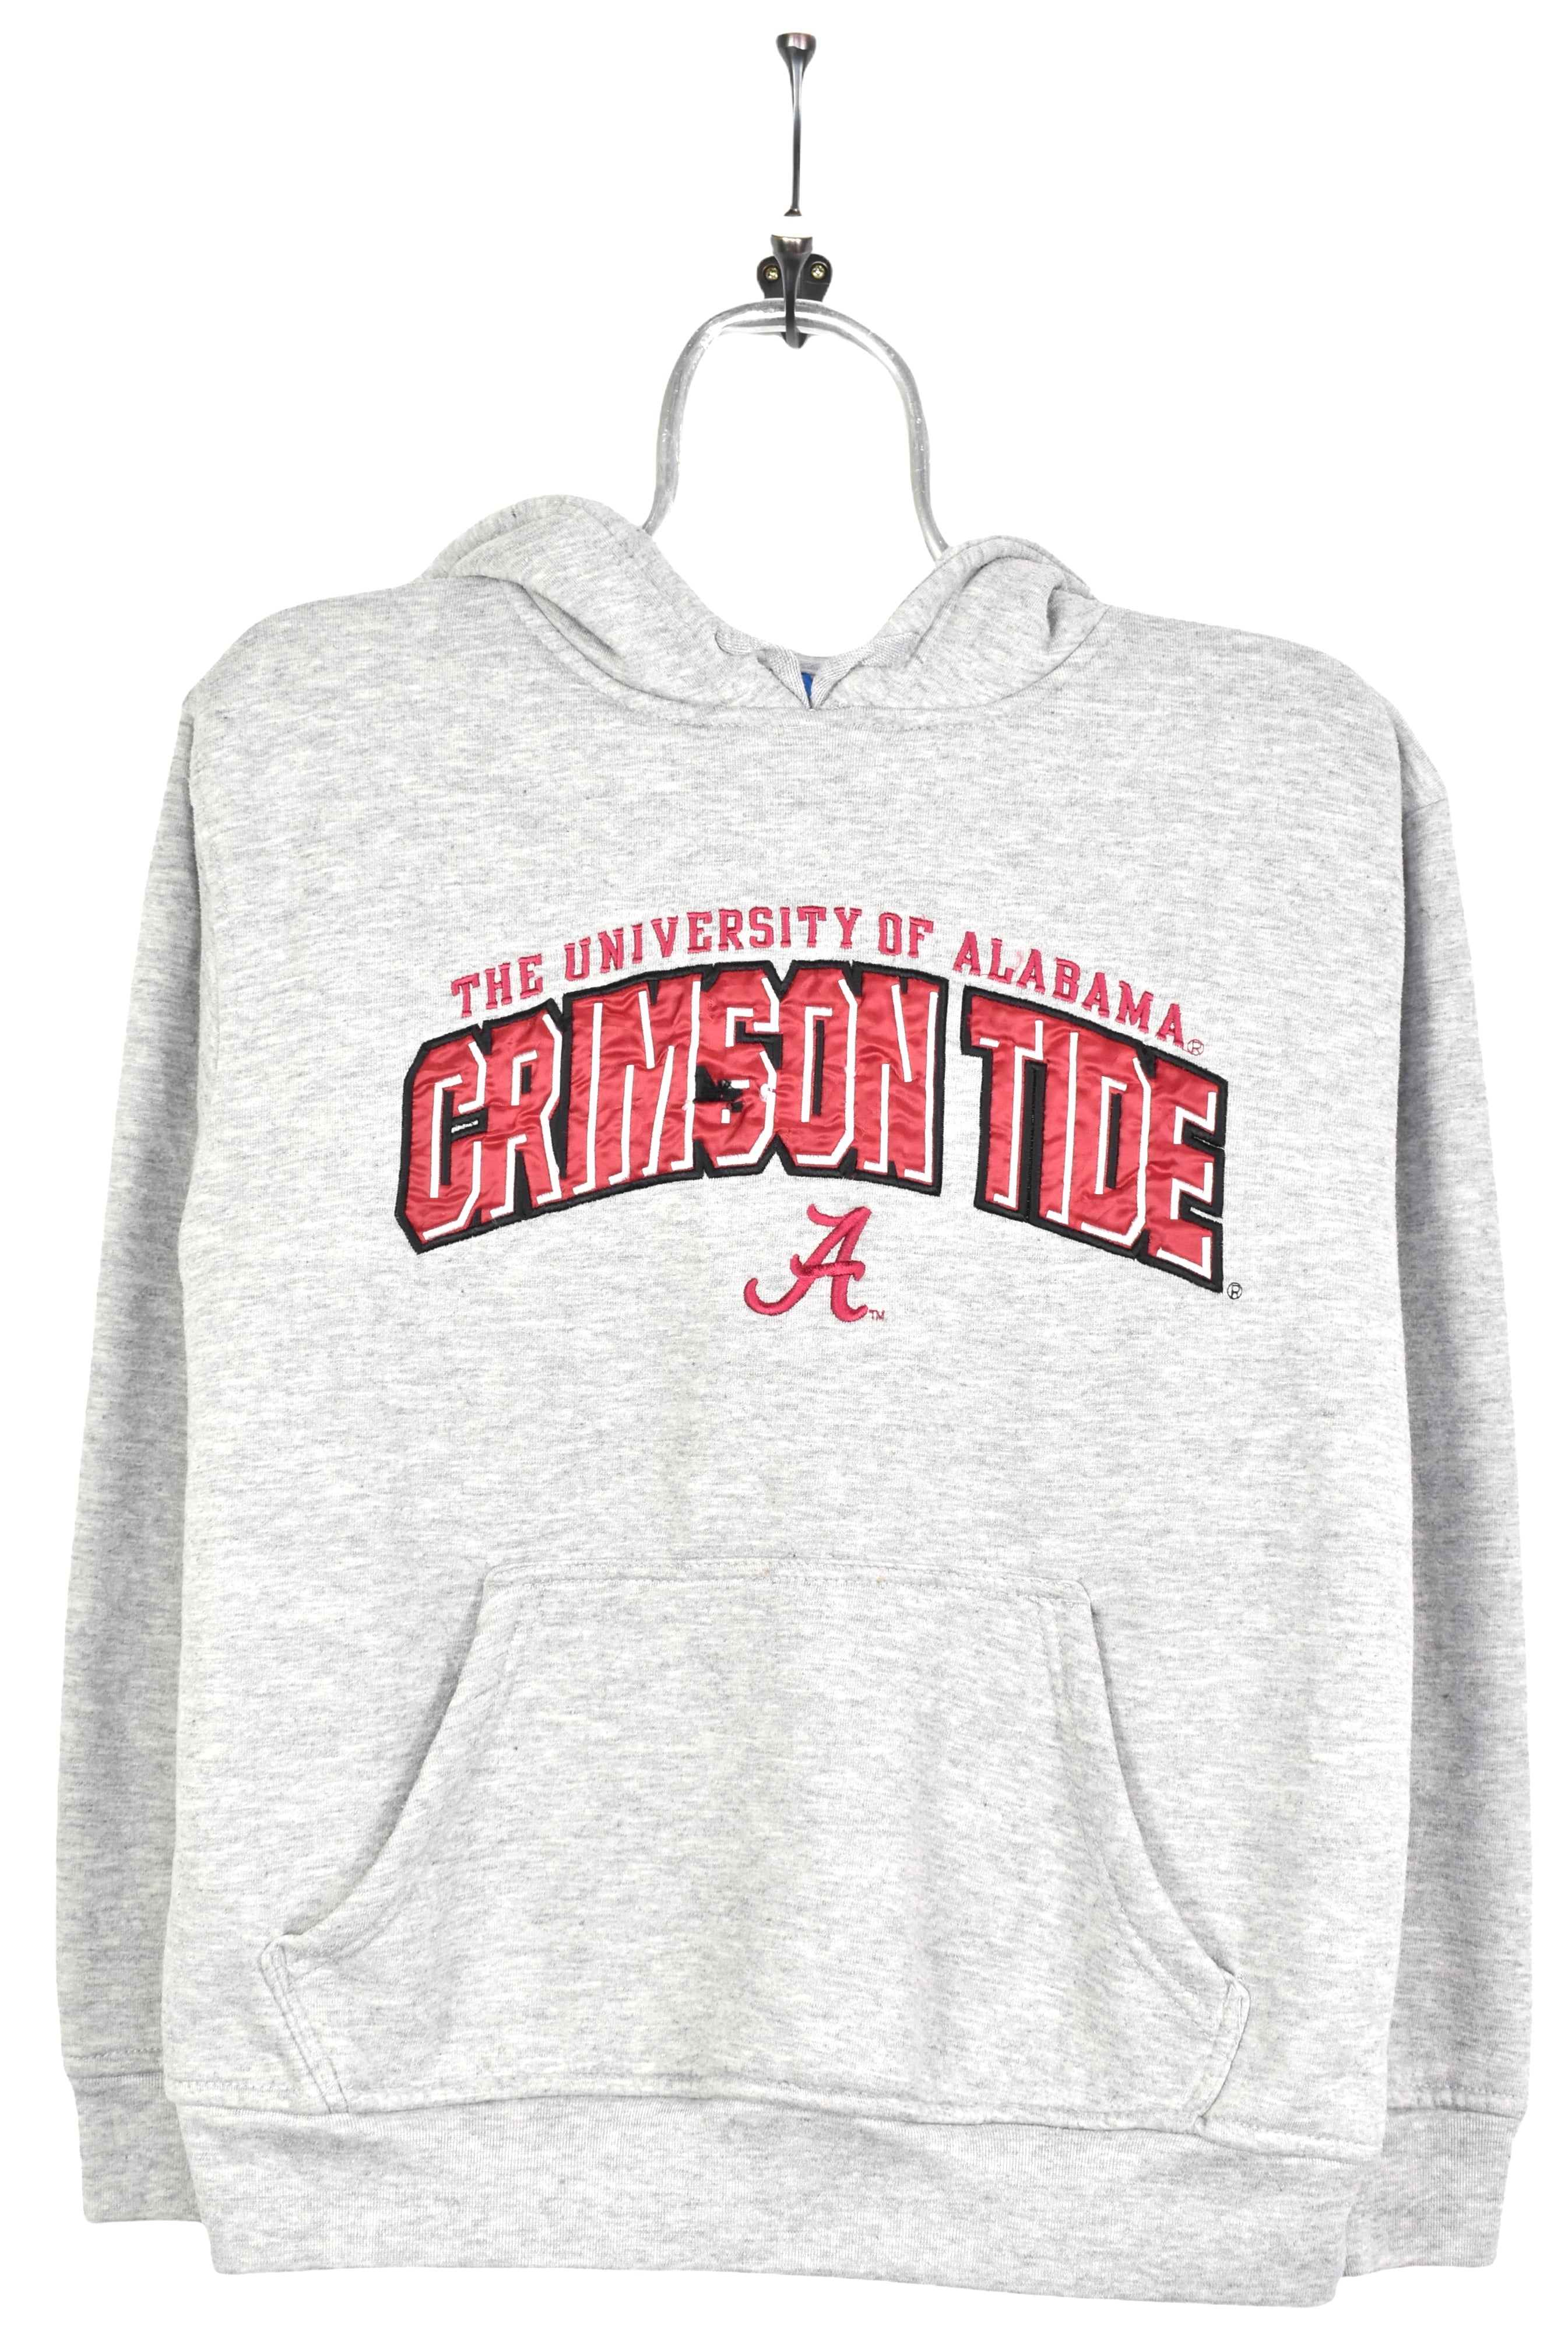 Vintage University of Alabama hoodie, pullover embroidered sweatshirt - small, grey COLLEGE